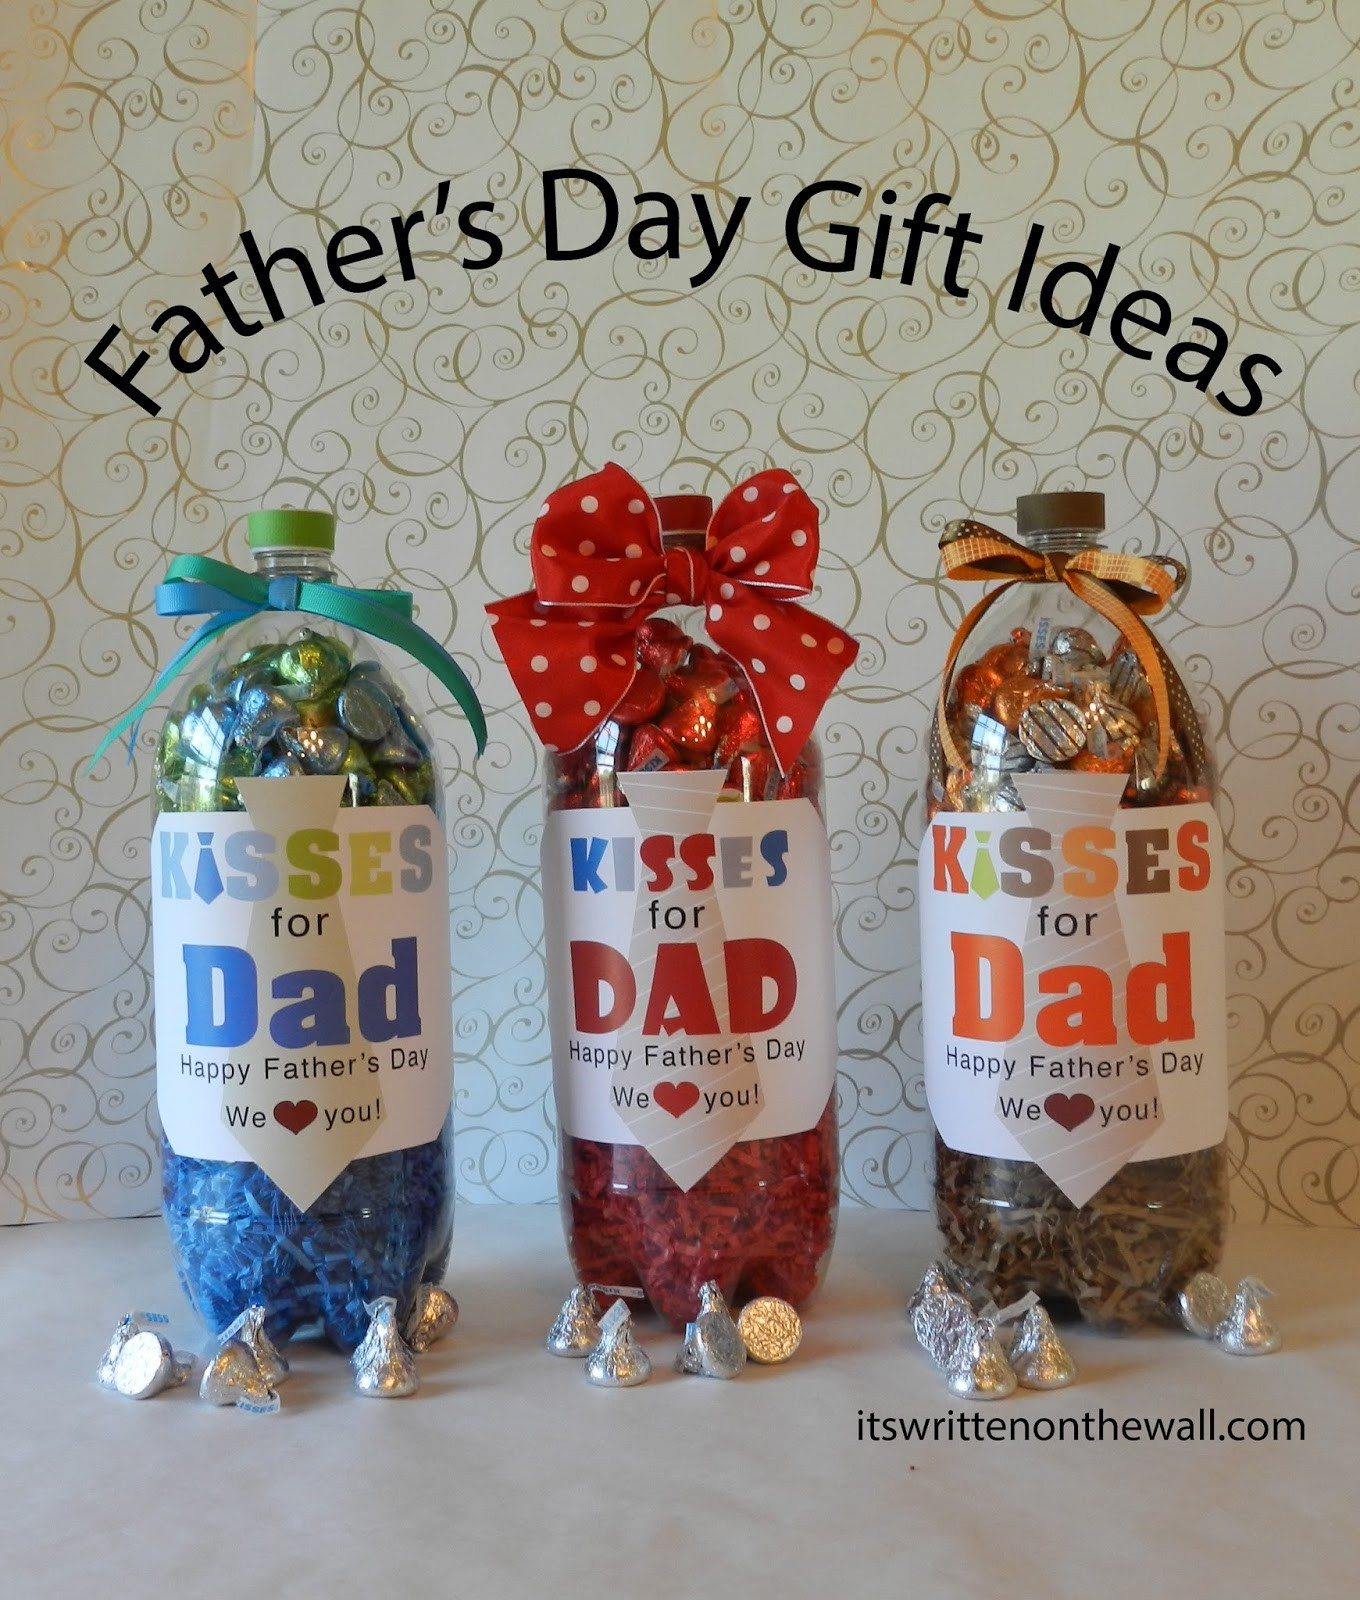 Father'S Day Gift Ideas From Child
 It s Written on the Wall Fathers Day Gift Ideas For the